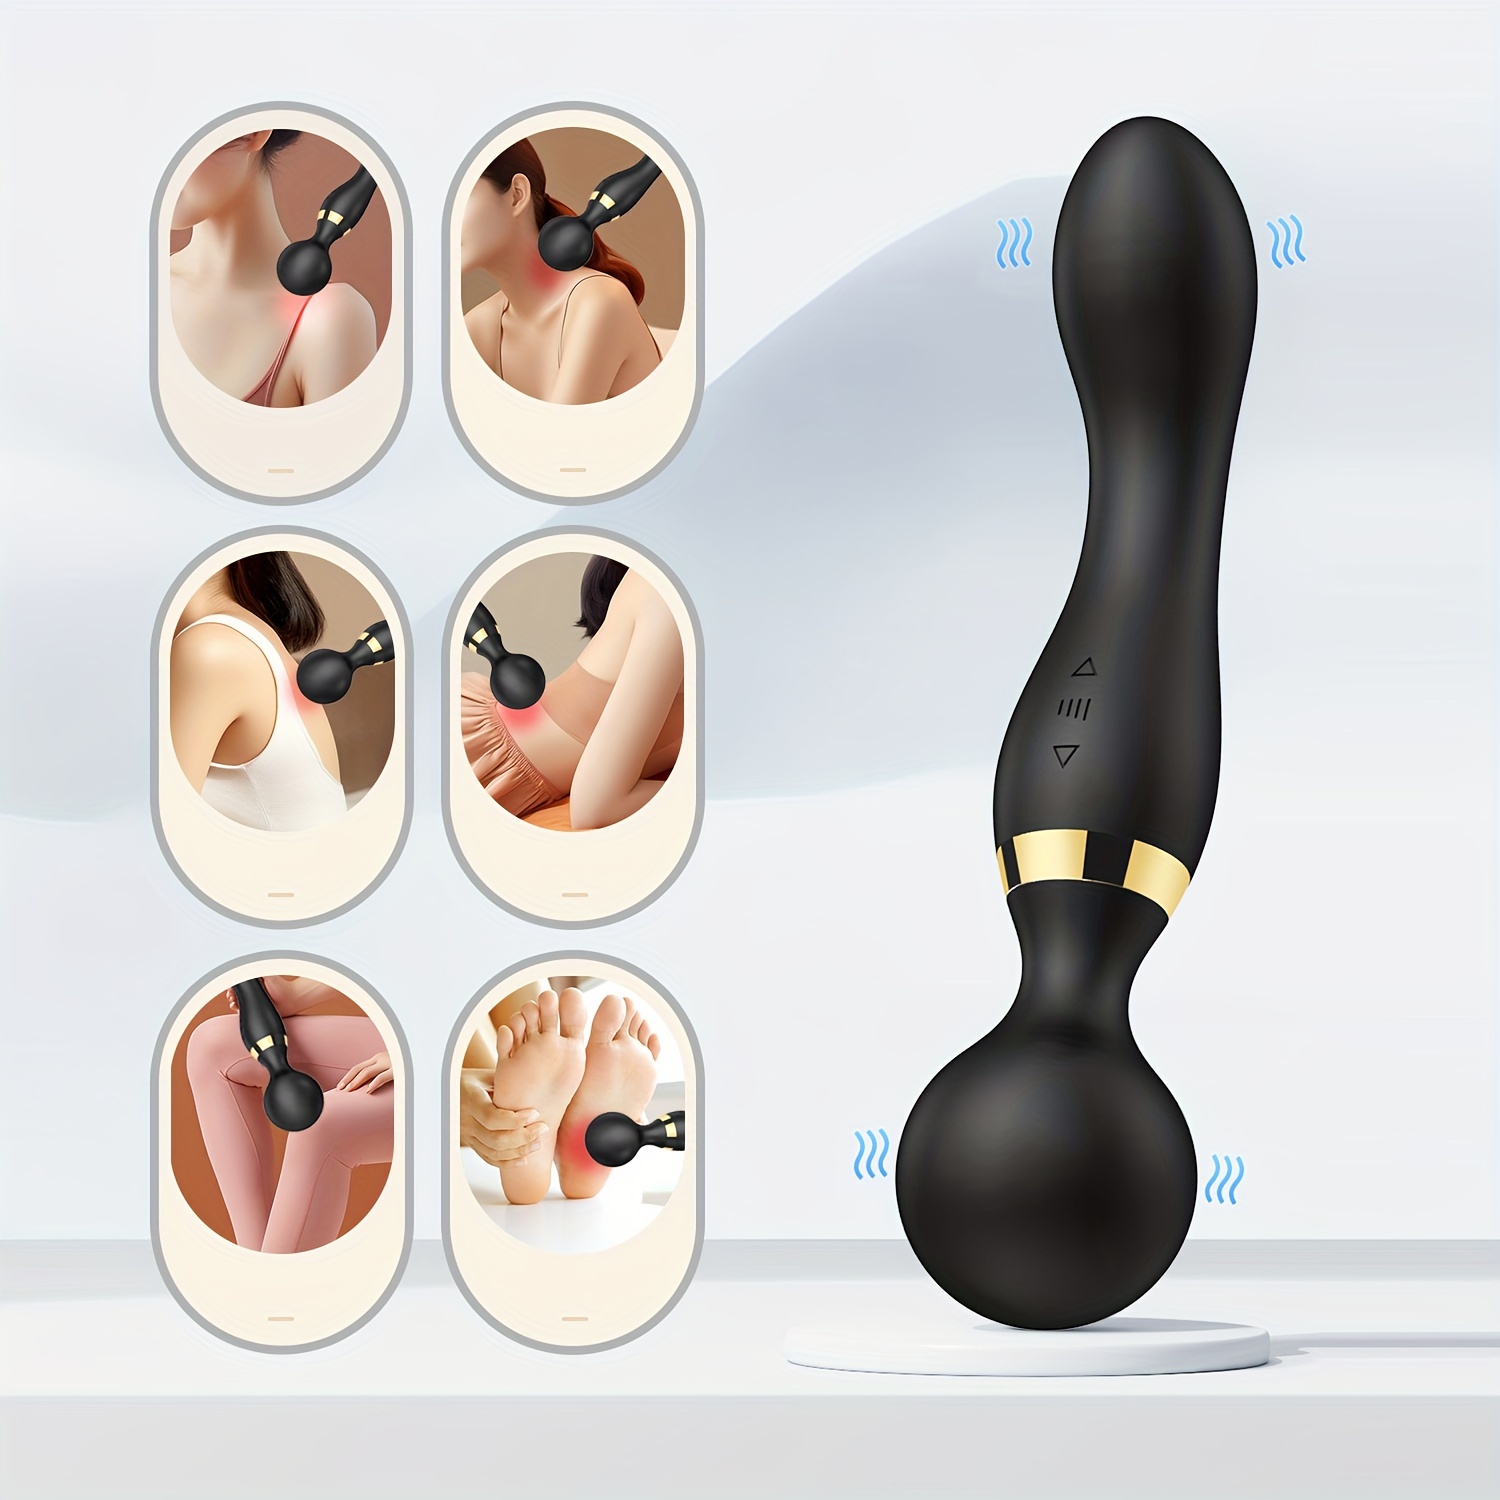 portable electric massage stick high frequency vibration massage massage gun 8 speed 20 frequency muscle relaxation handheld massager for body back neck legs waist massage easy to carry ultra compact elegant design high speed drive motor details 1